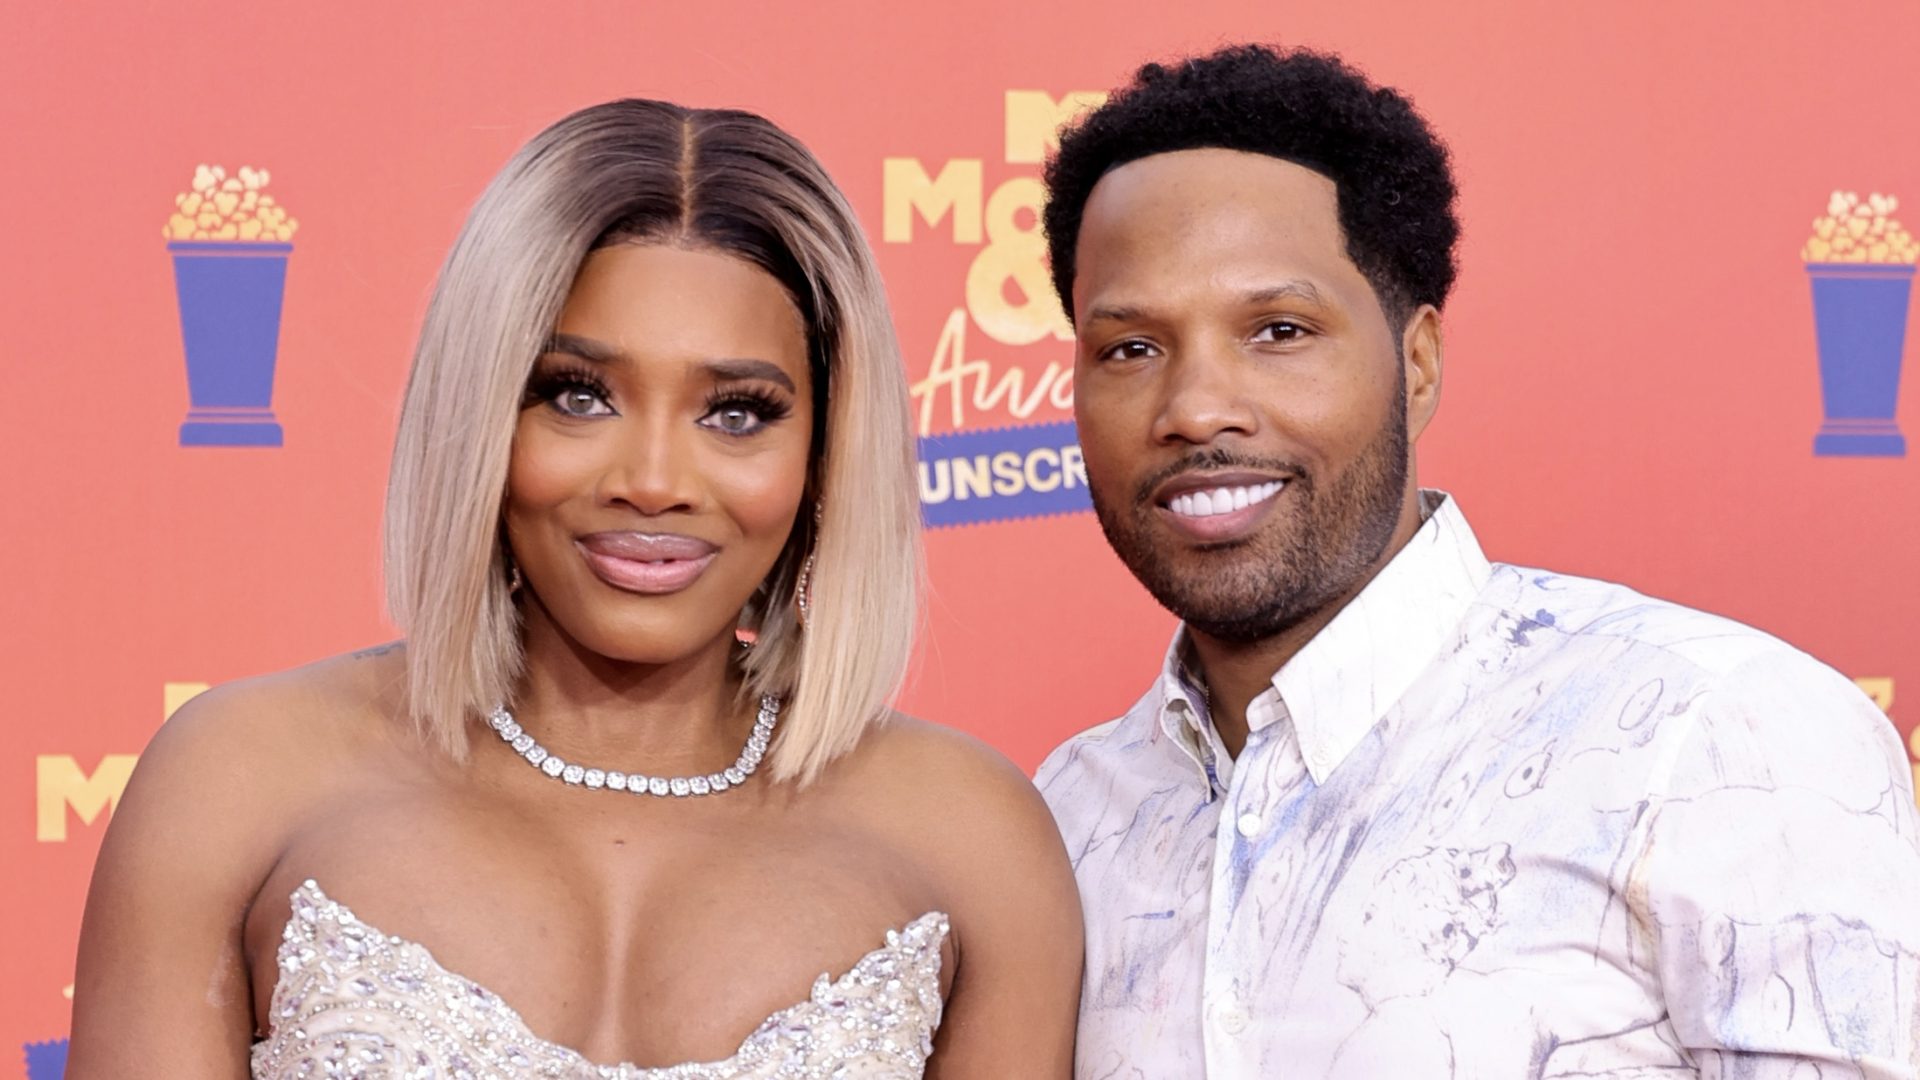 Oop! Mendeecees Seemingly Reacts After Being Accused Of Cheating On Yandy Smith (Videos) thumbnail